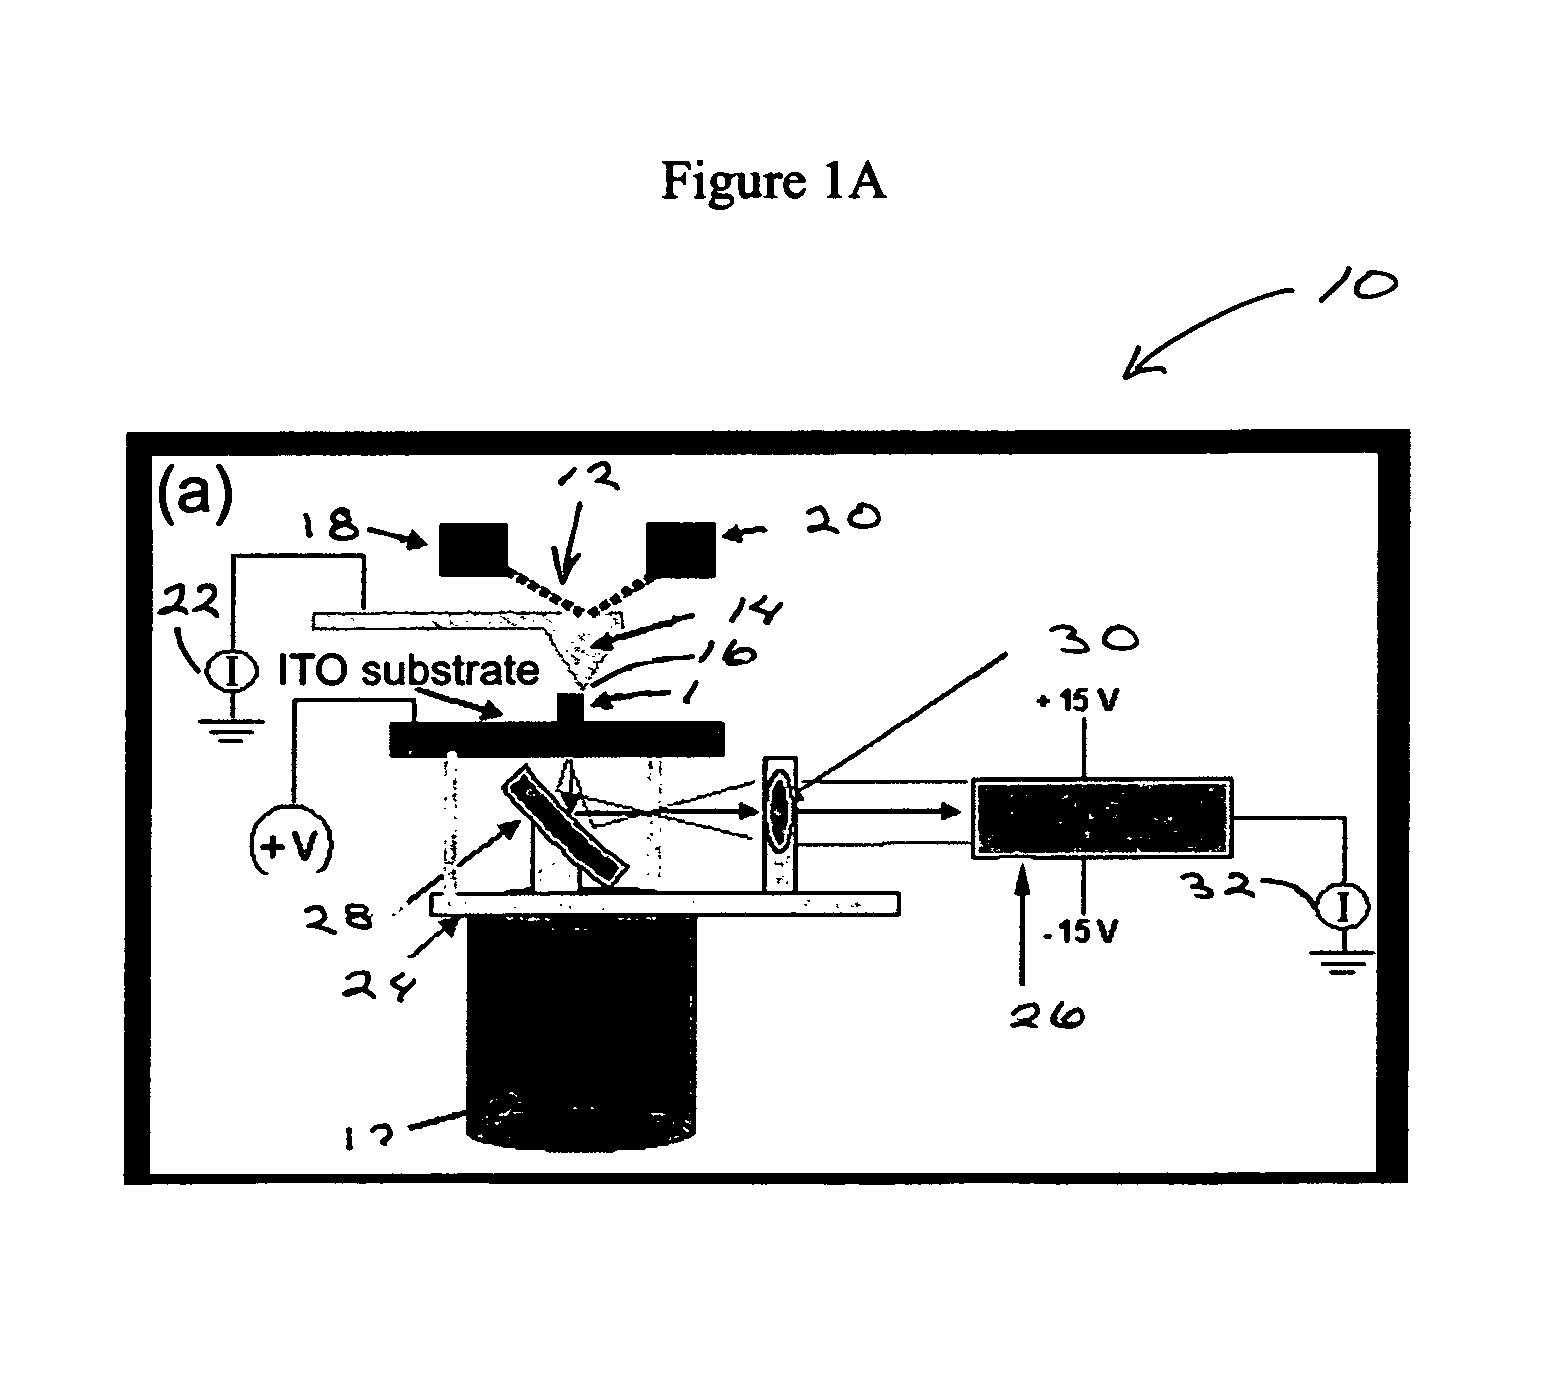 Methods and apparatus of spatially resolved electroluminescence of operating organic light-emitting diodes using conductive atomic force microscopy